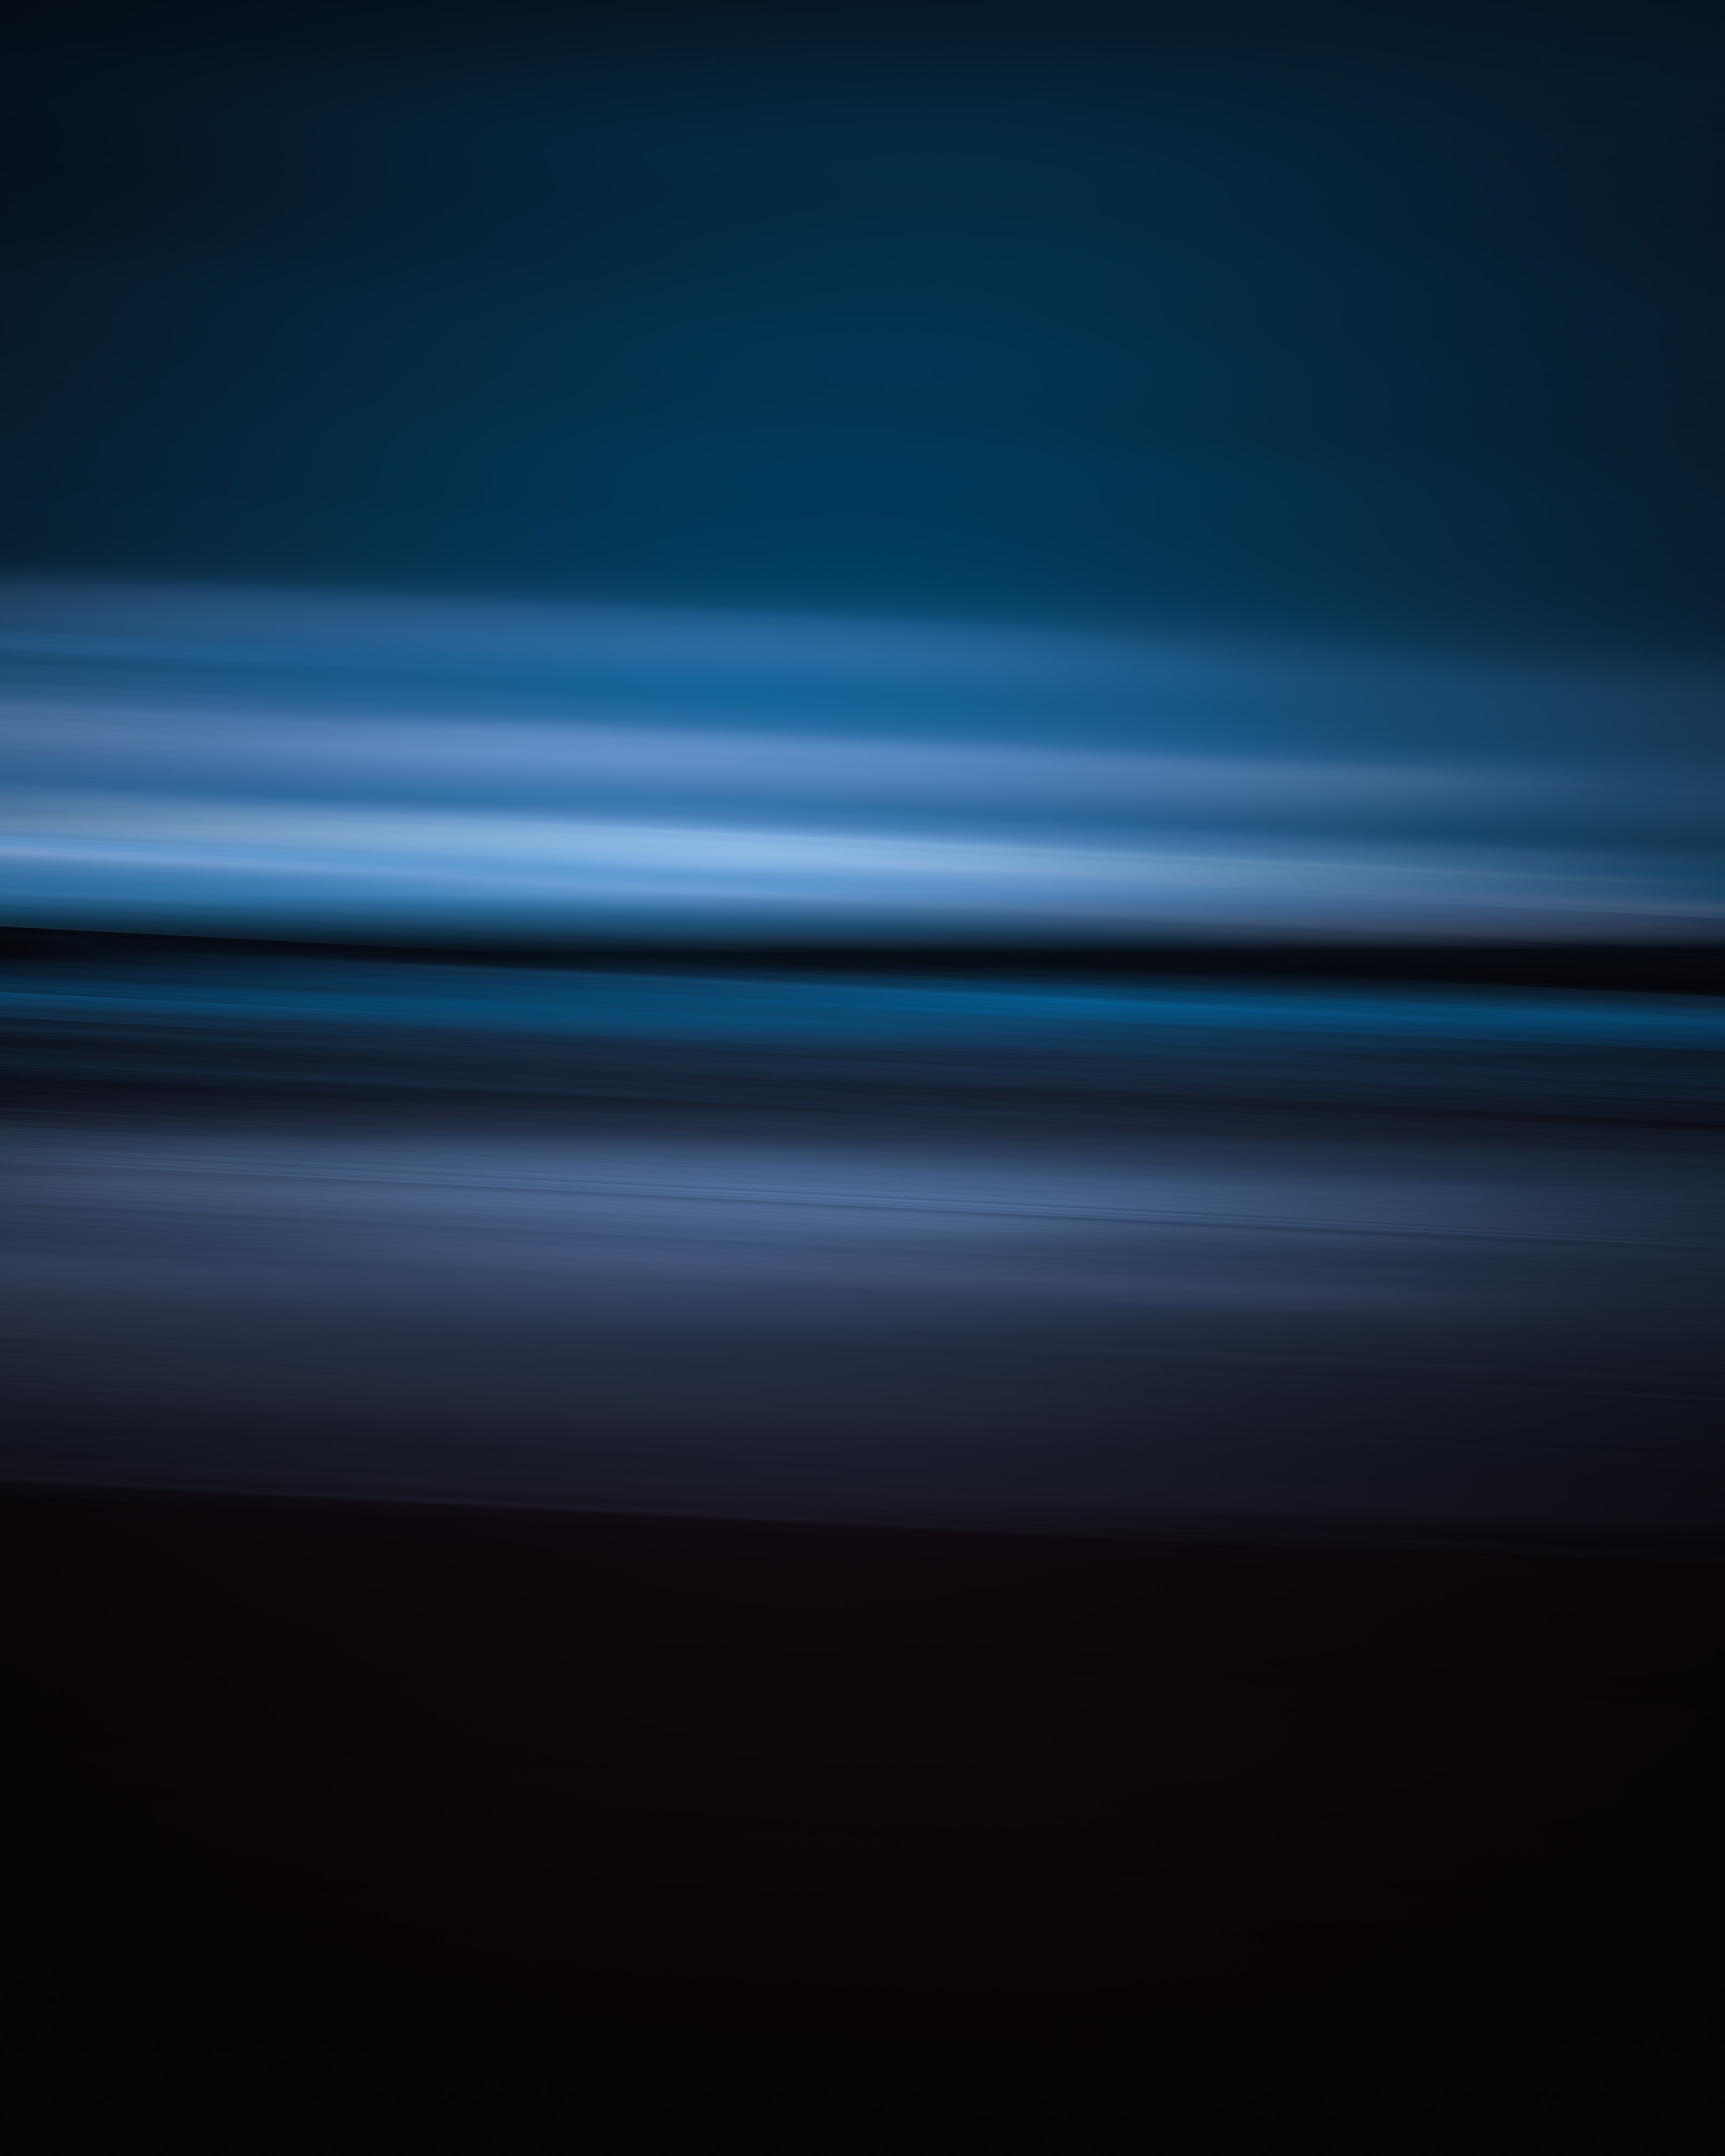 blur, blue, abstract, streaks, stripes, smooth, distortion